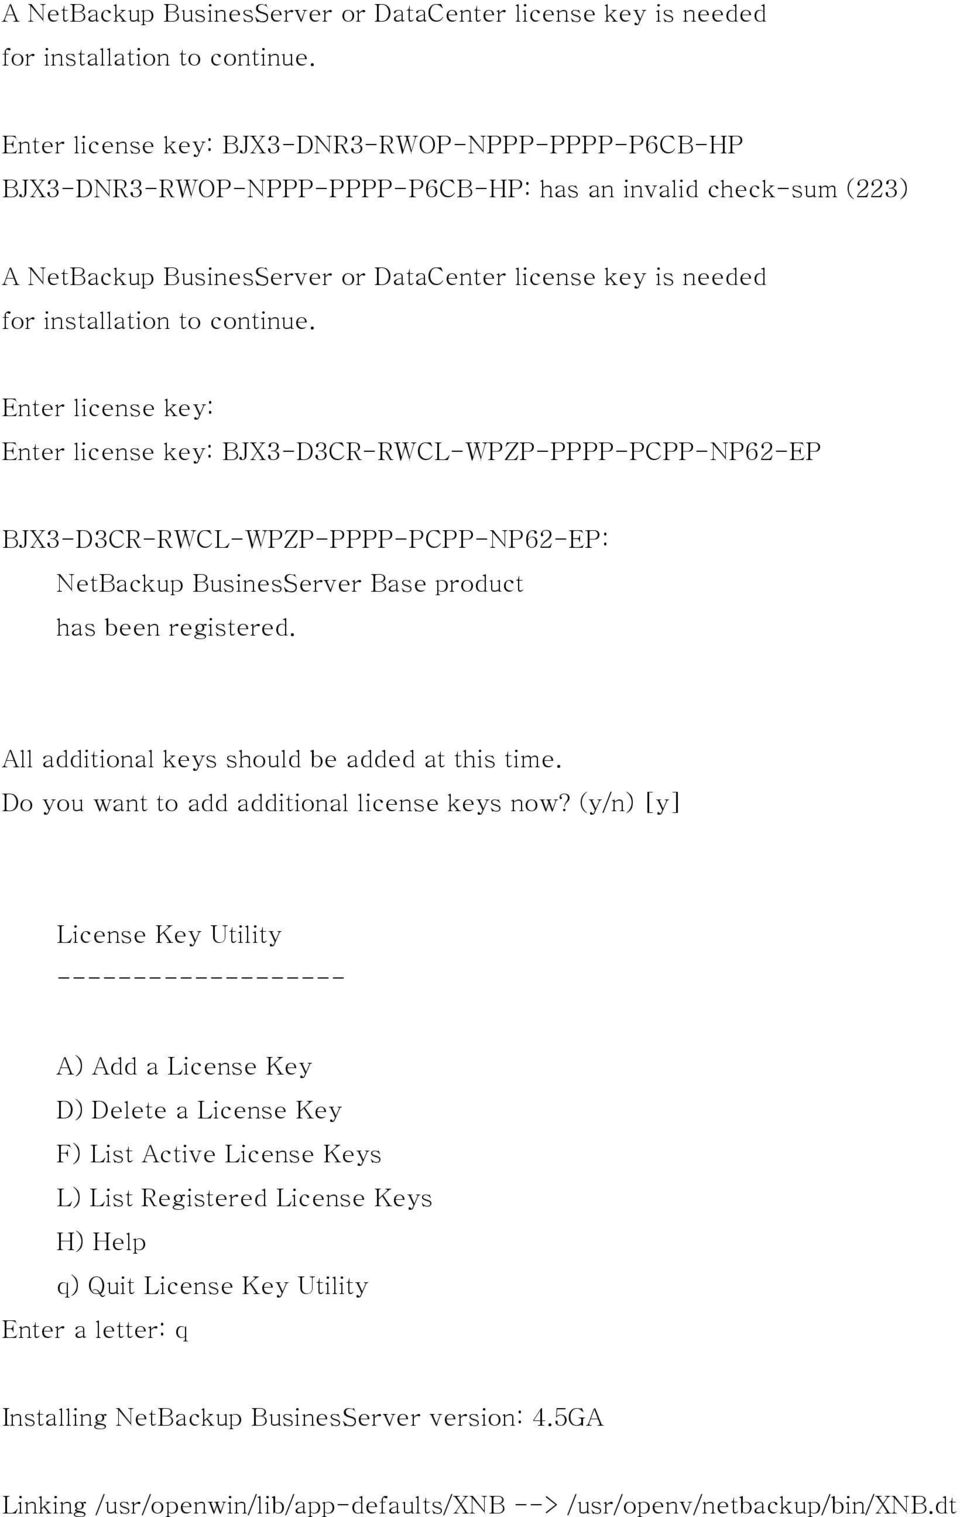 BJX3-D3CR-RWCL-WPZP-PPPP-PCPP-NP62-EP: NetBackup BusinesServer Base product has been registered. All additional keys should be added at this time. Do you want to add additional license keys now?